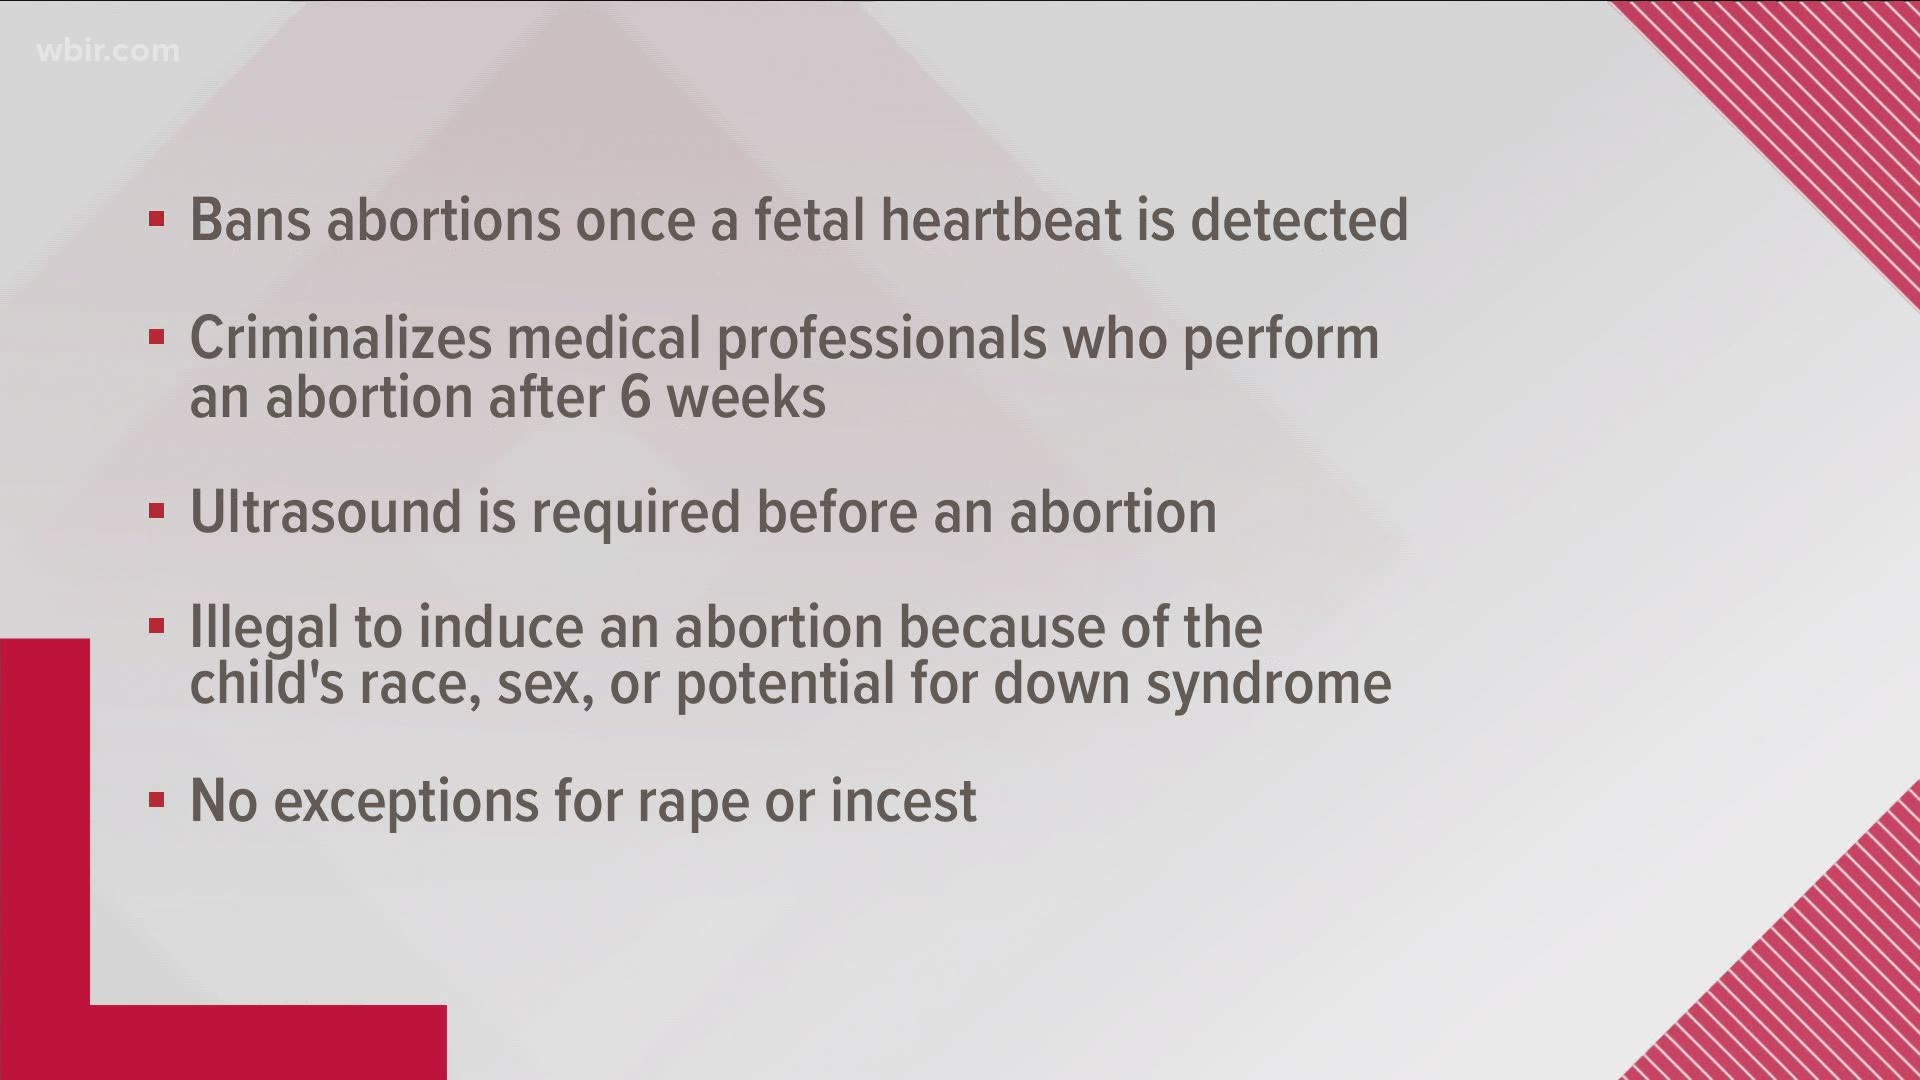 The legislation bans abortions once a fetal heartbeat is detected, which is as early as six weeks. It also criminalizes medical professionals who perform an abortion